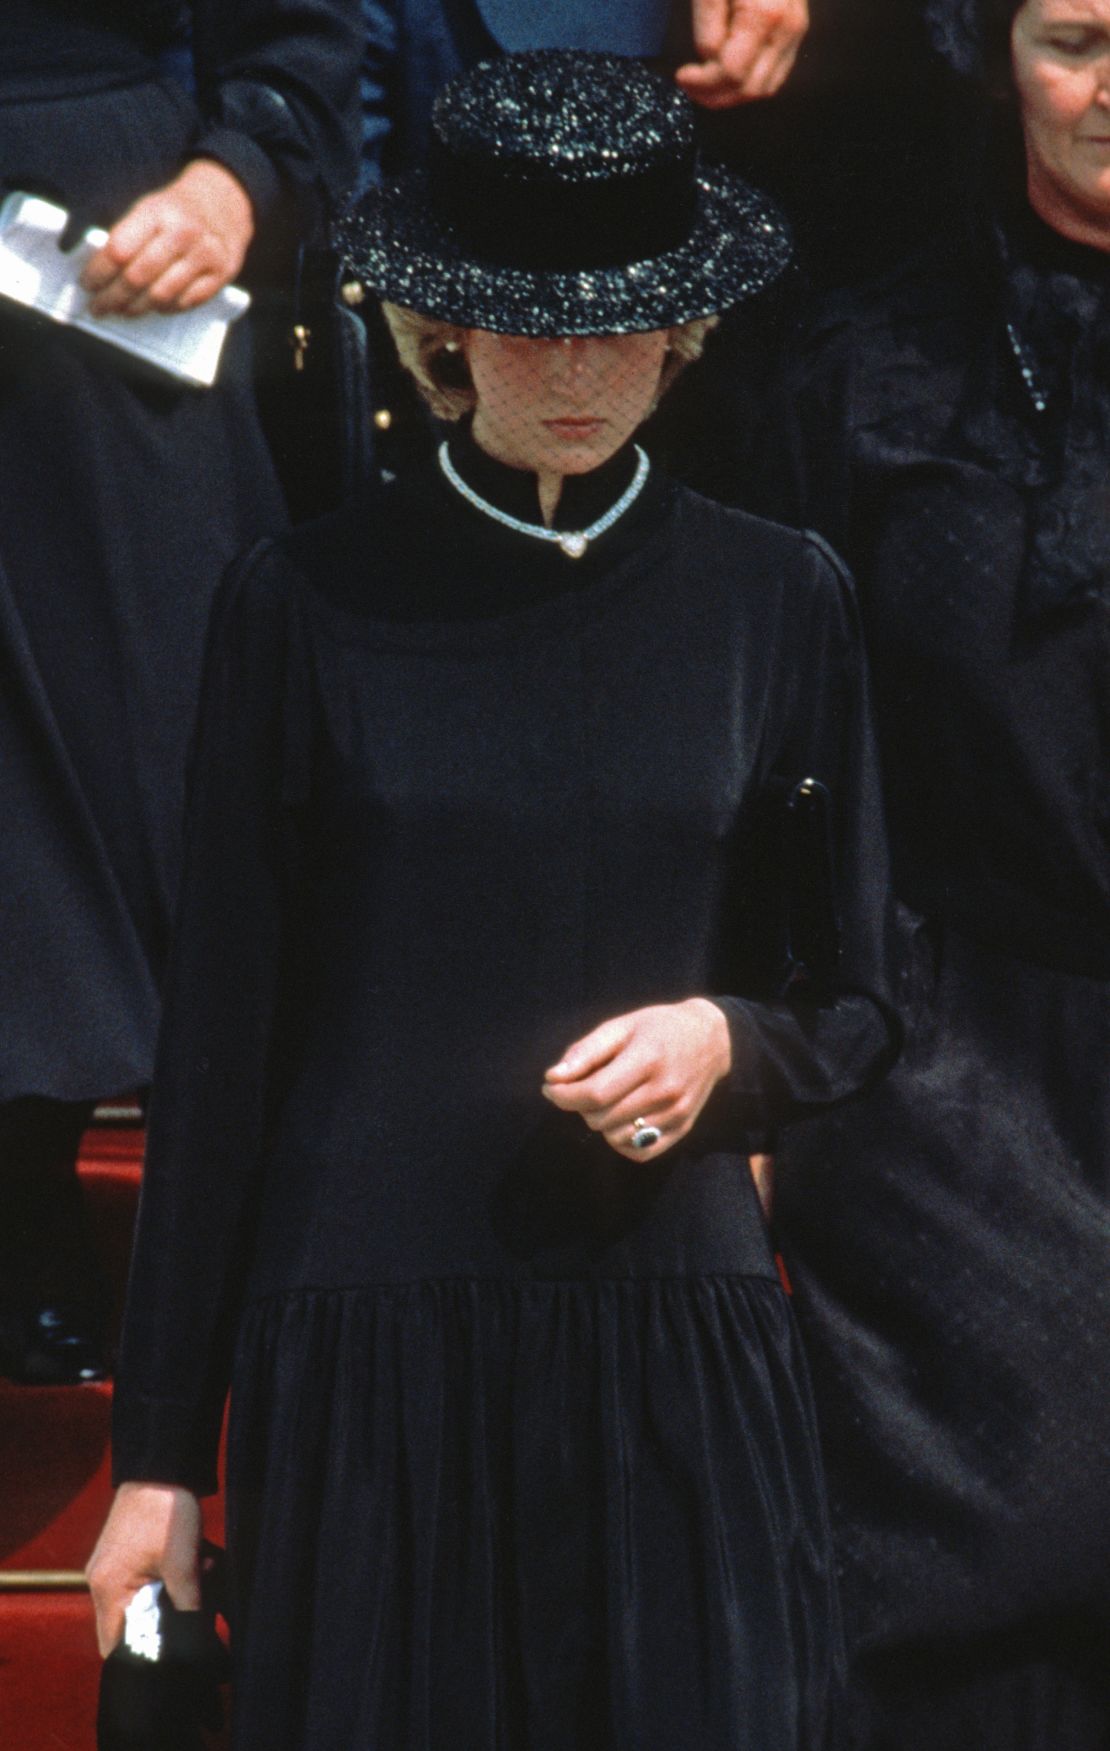 Diana, Princess of Wales, at the funeral of Princess Grace of Monaco on September 18, 1982.